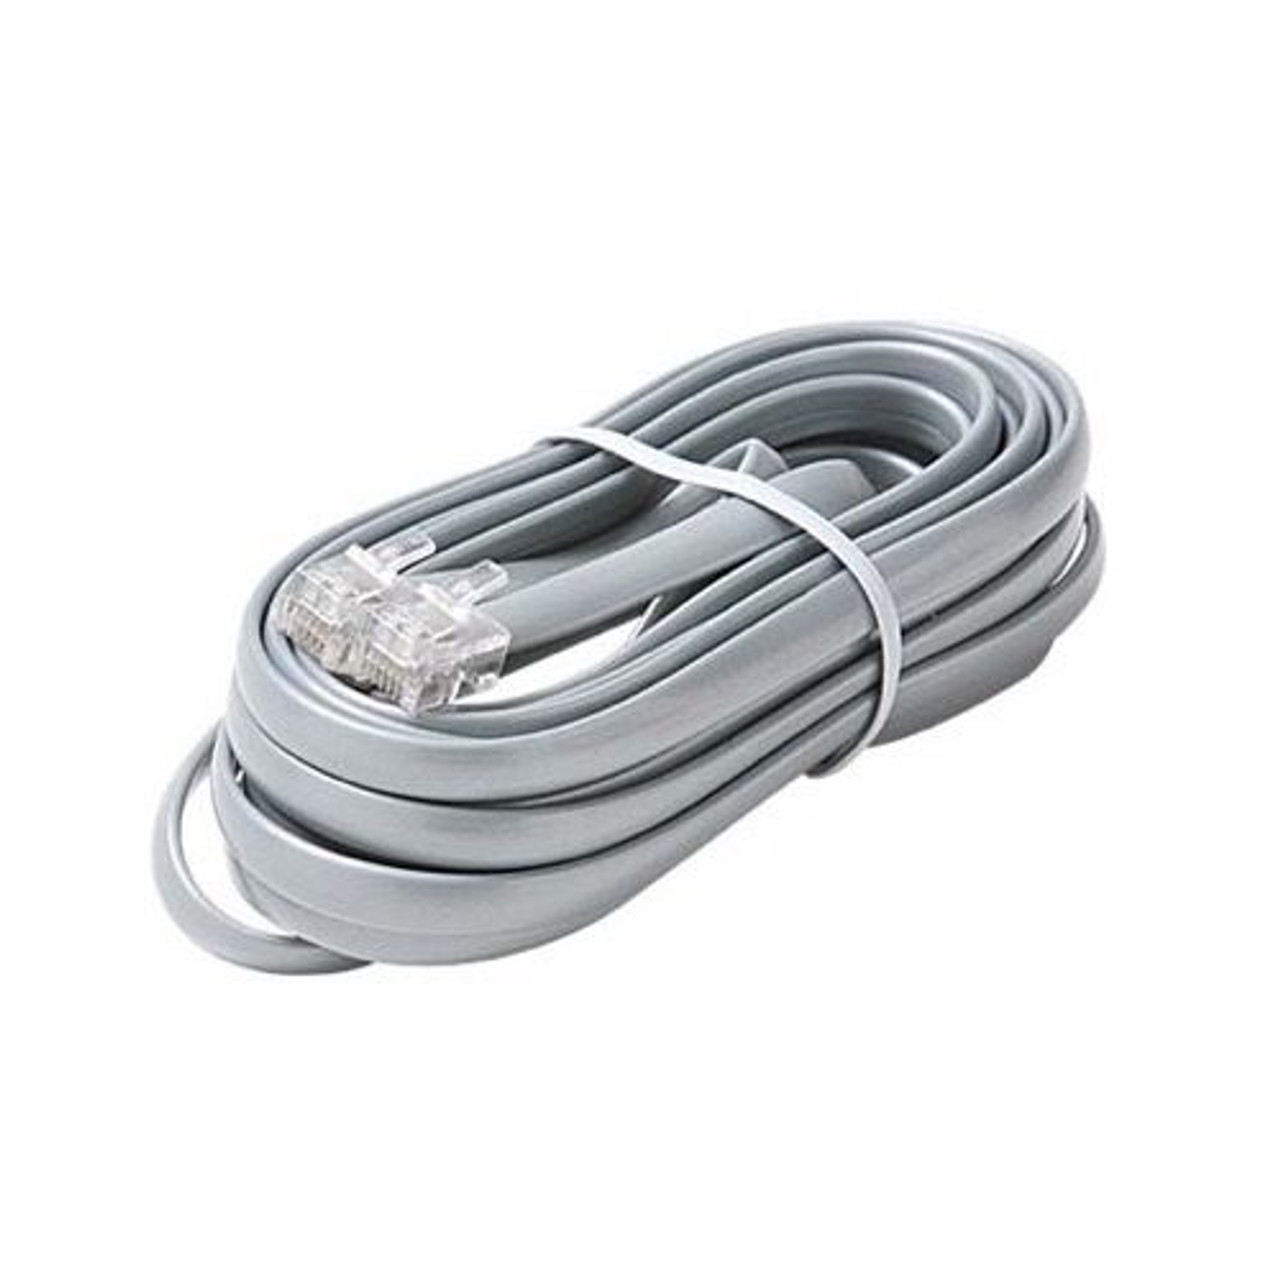 Steren 308-707SL 7' FT Cable Data Modular 8 Conductor Silver Cord Satin Gray Flat RJ45 Telephone Line Flat Cord Voice Data with Plug RJ-45 Connector Both End 8P8C Phone Cross-Wired for VoIP, Part # 308707-SL